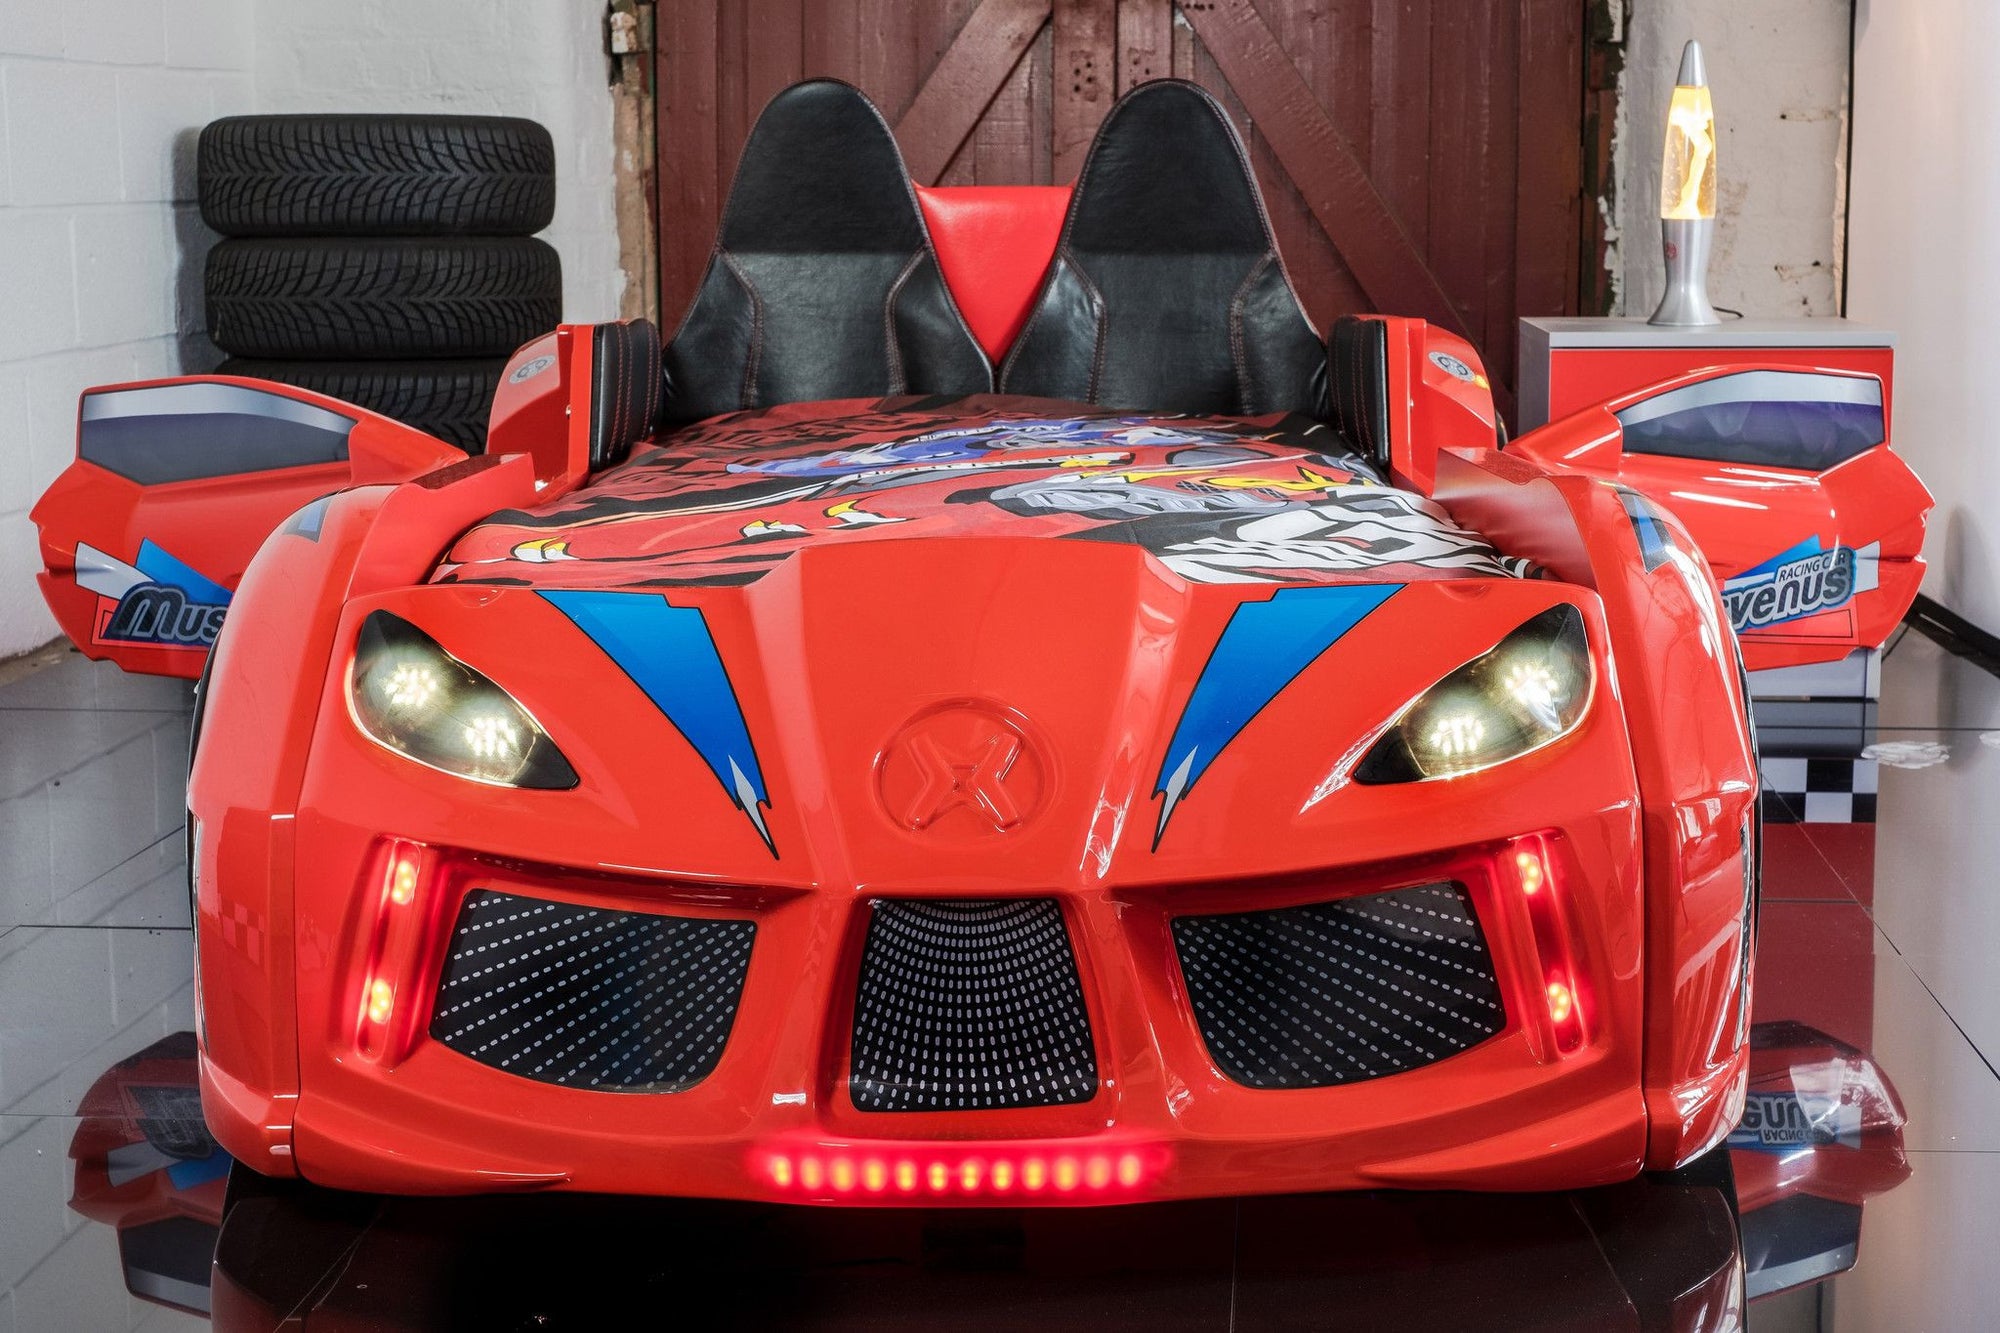 GT Eco Speed 3FT Single Children's Novelty Red Racing Car Bed with  Headlights